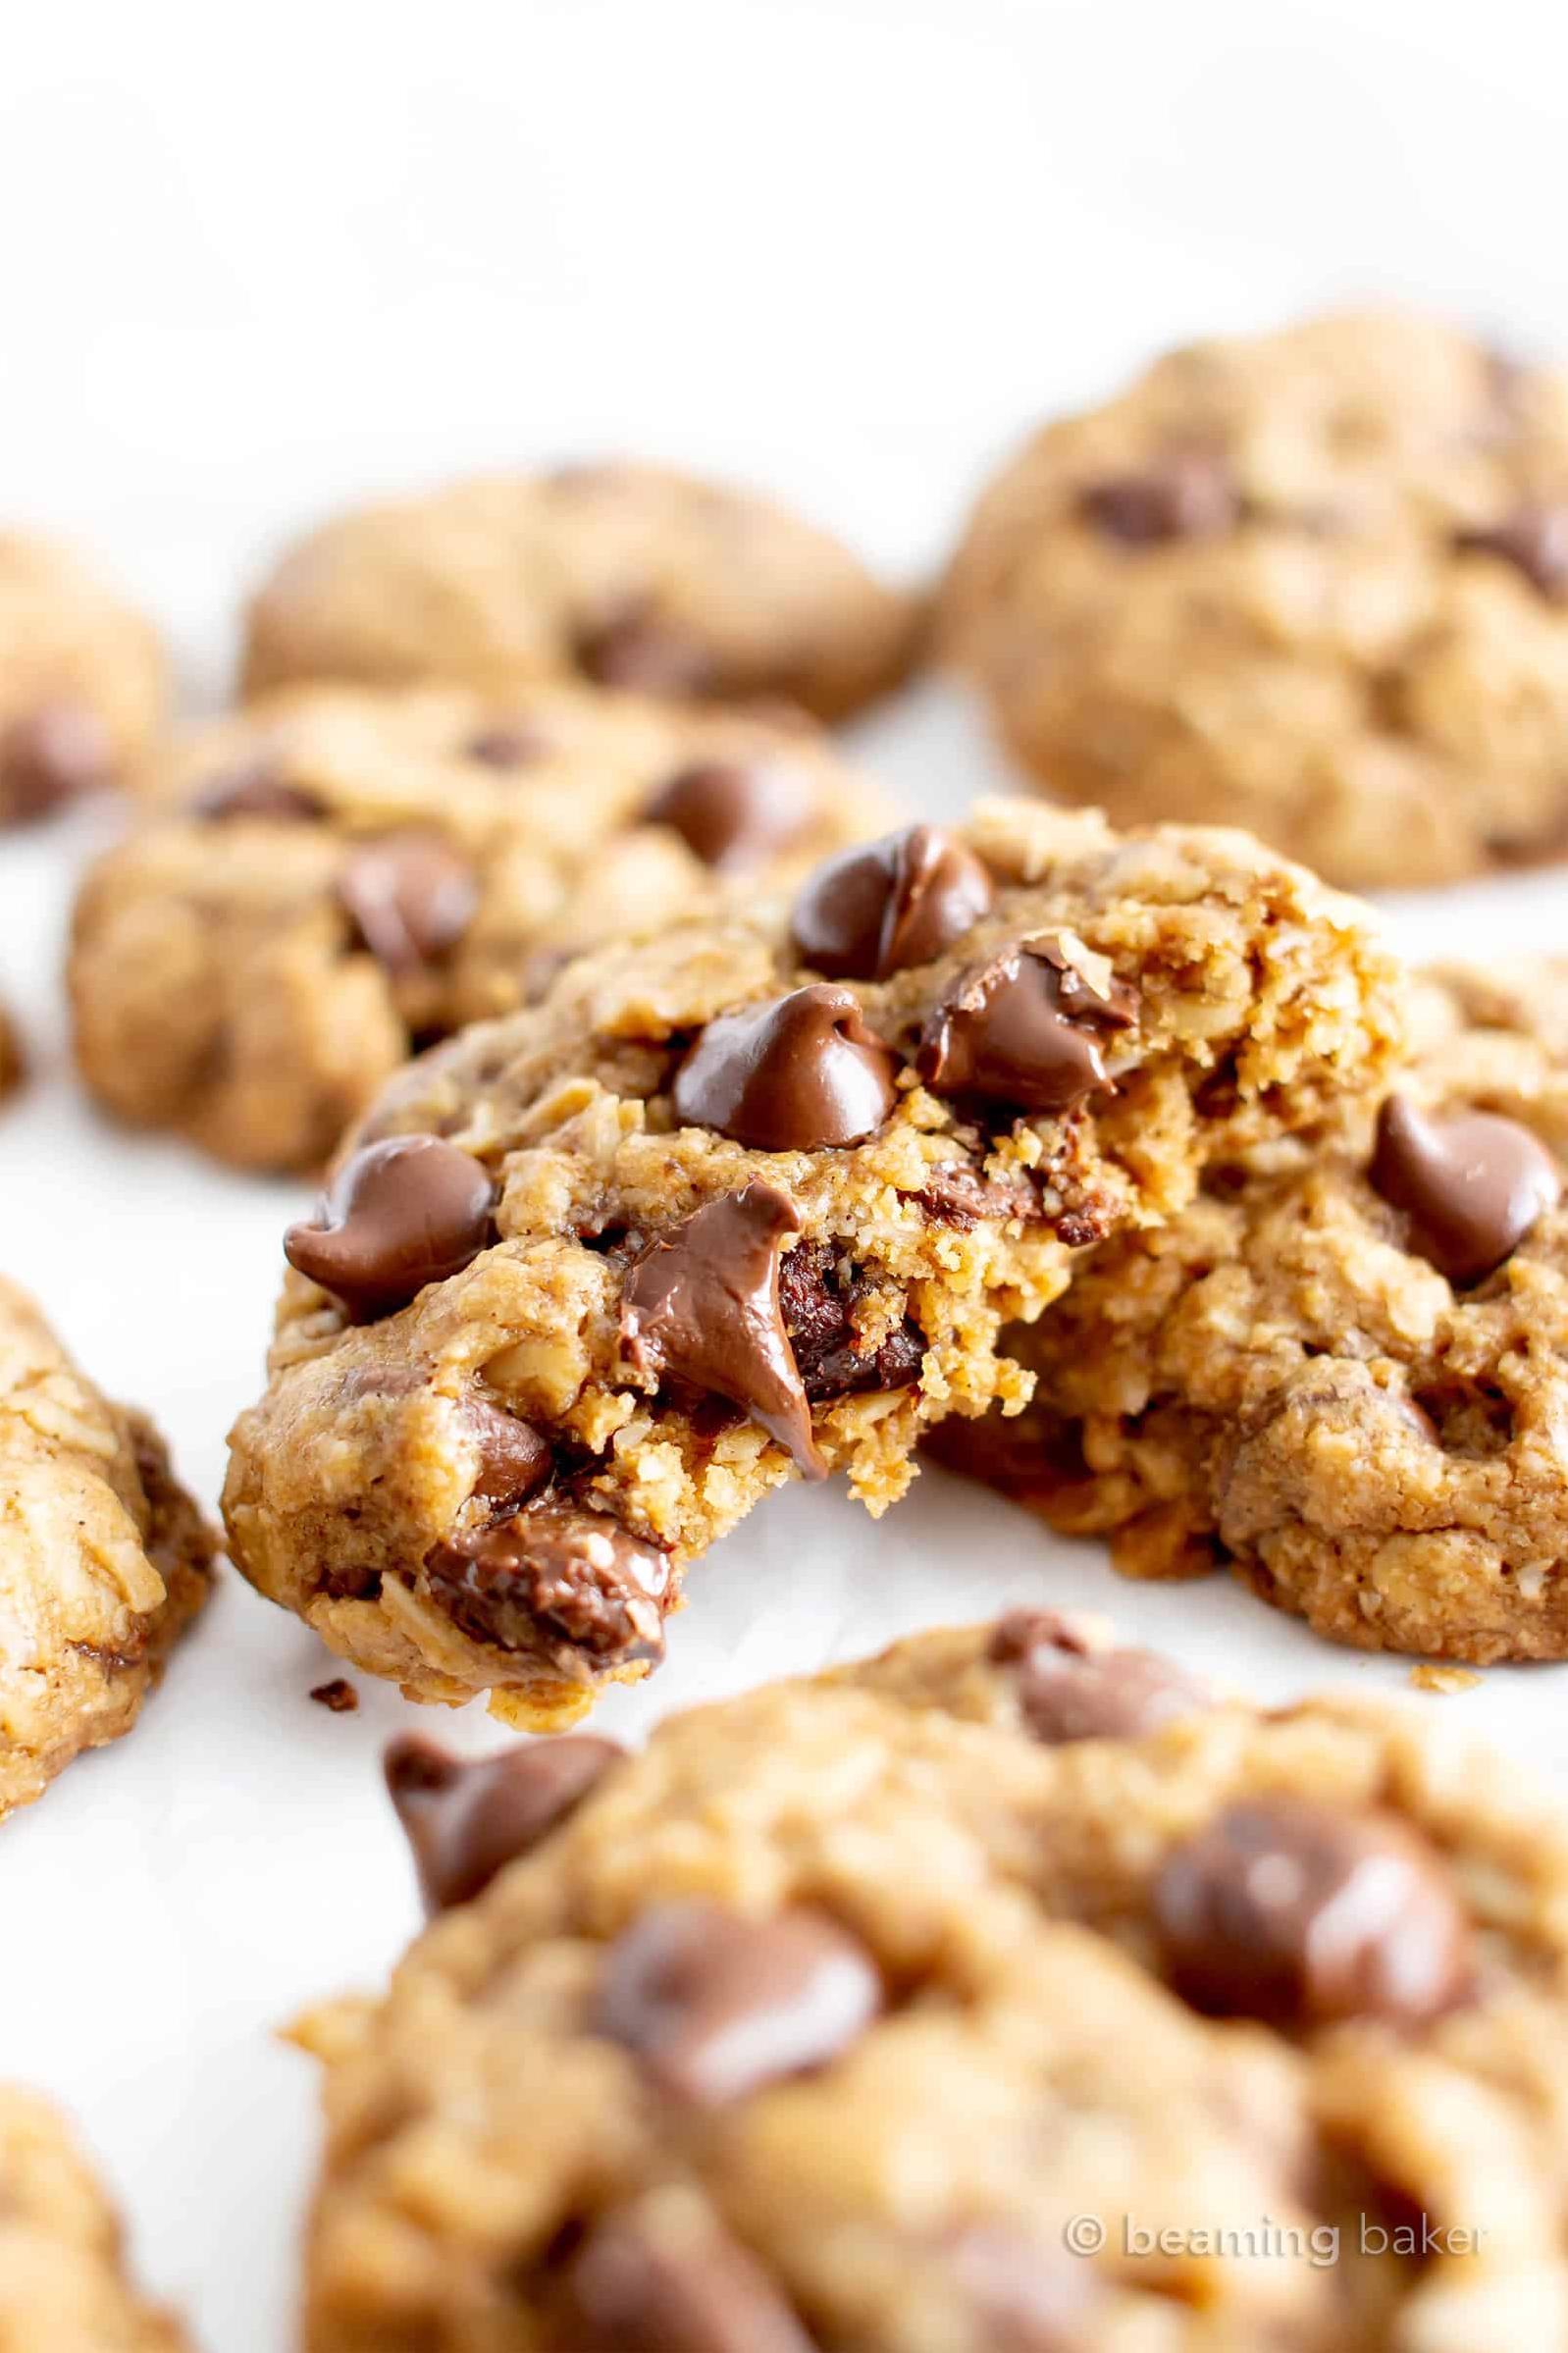  Make your next snack time extra special with a batch of these mouth-watering cookies.